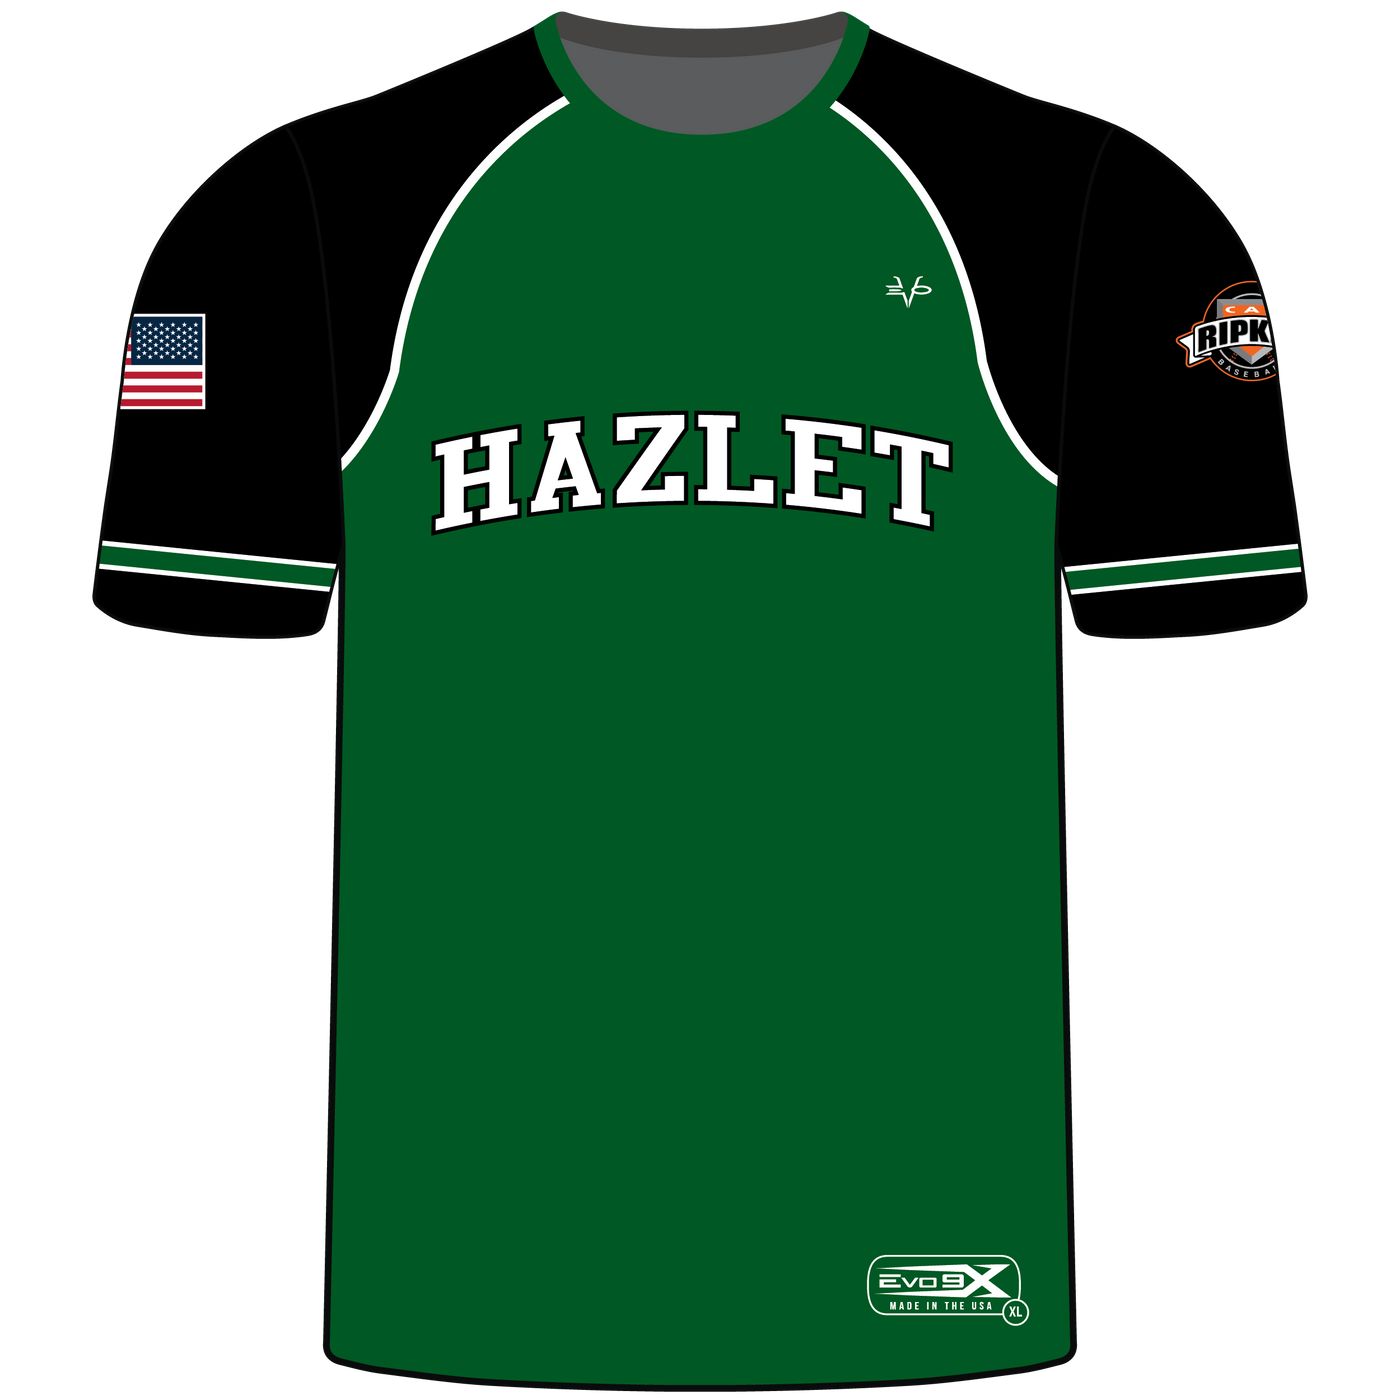 I'm a little disappointed with our City Connect jerseys so I made